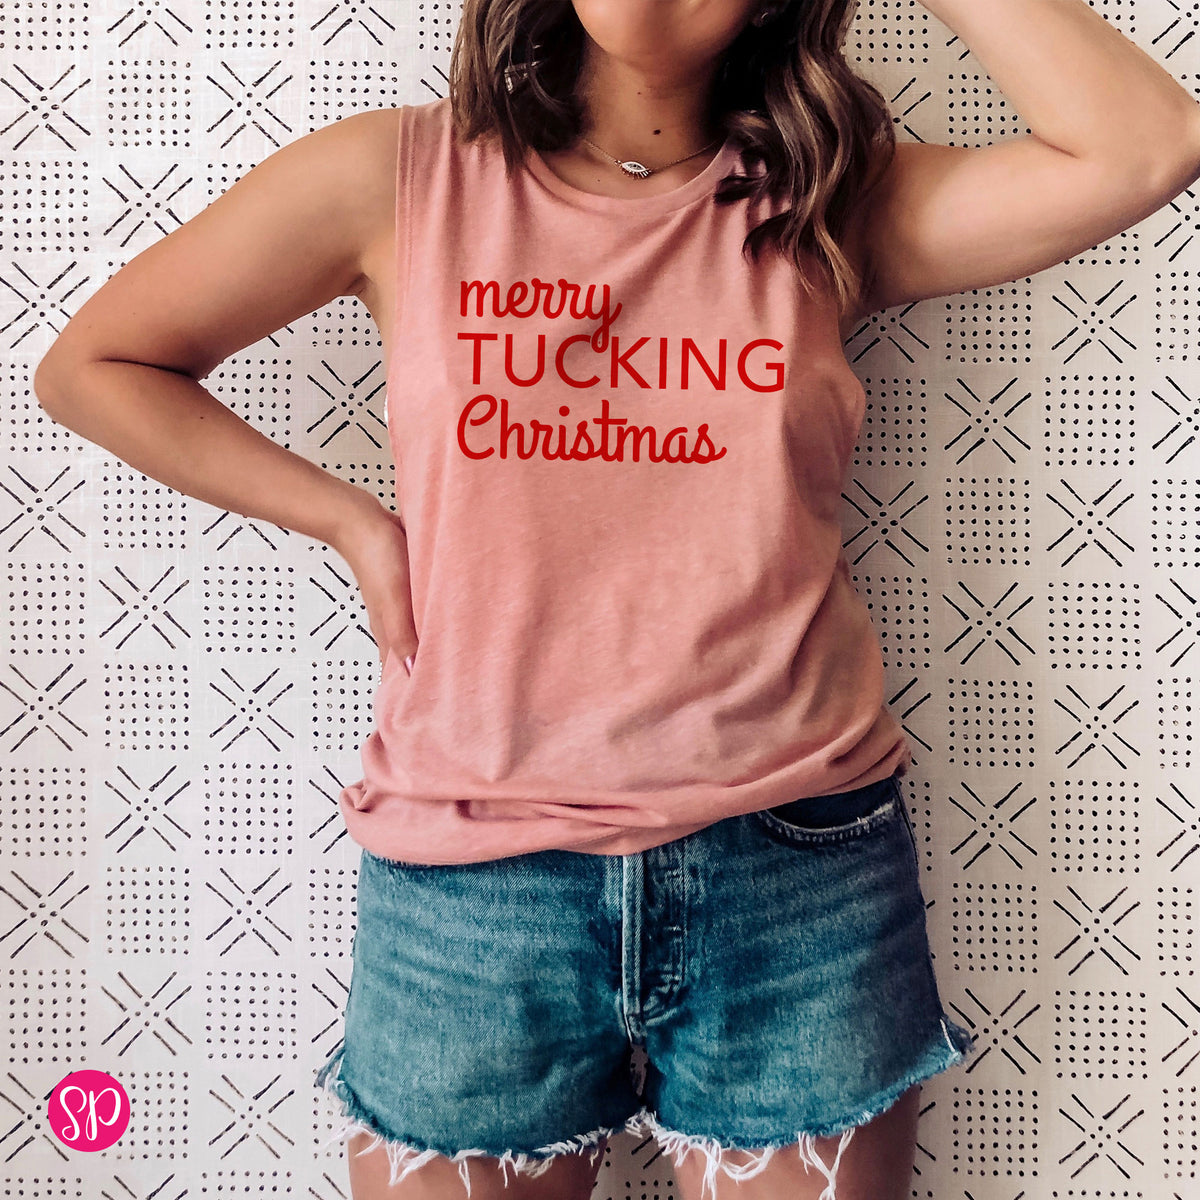 Merry Tucking Christmas Funny Barre Pilates Workout Fitness Muscle Tank Top Women